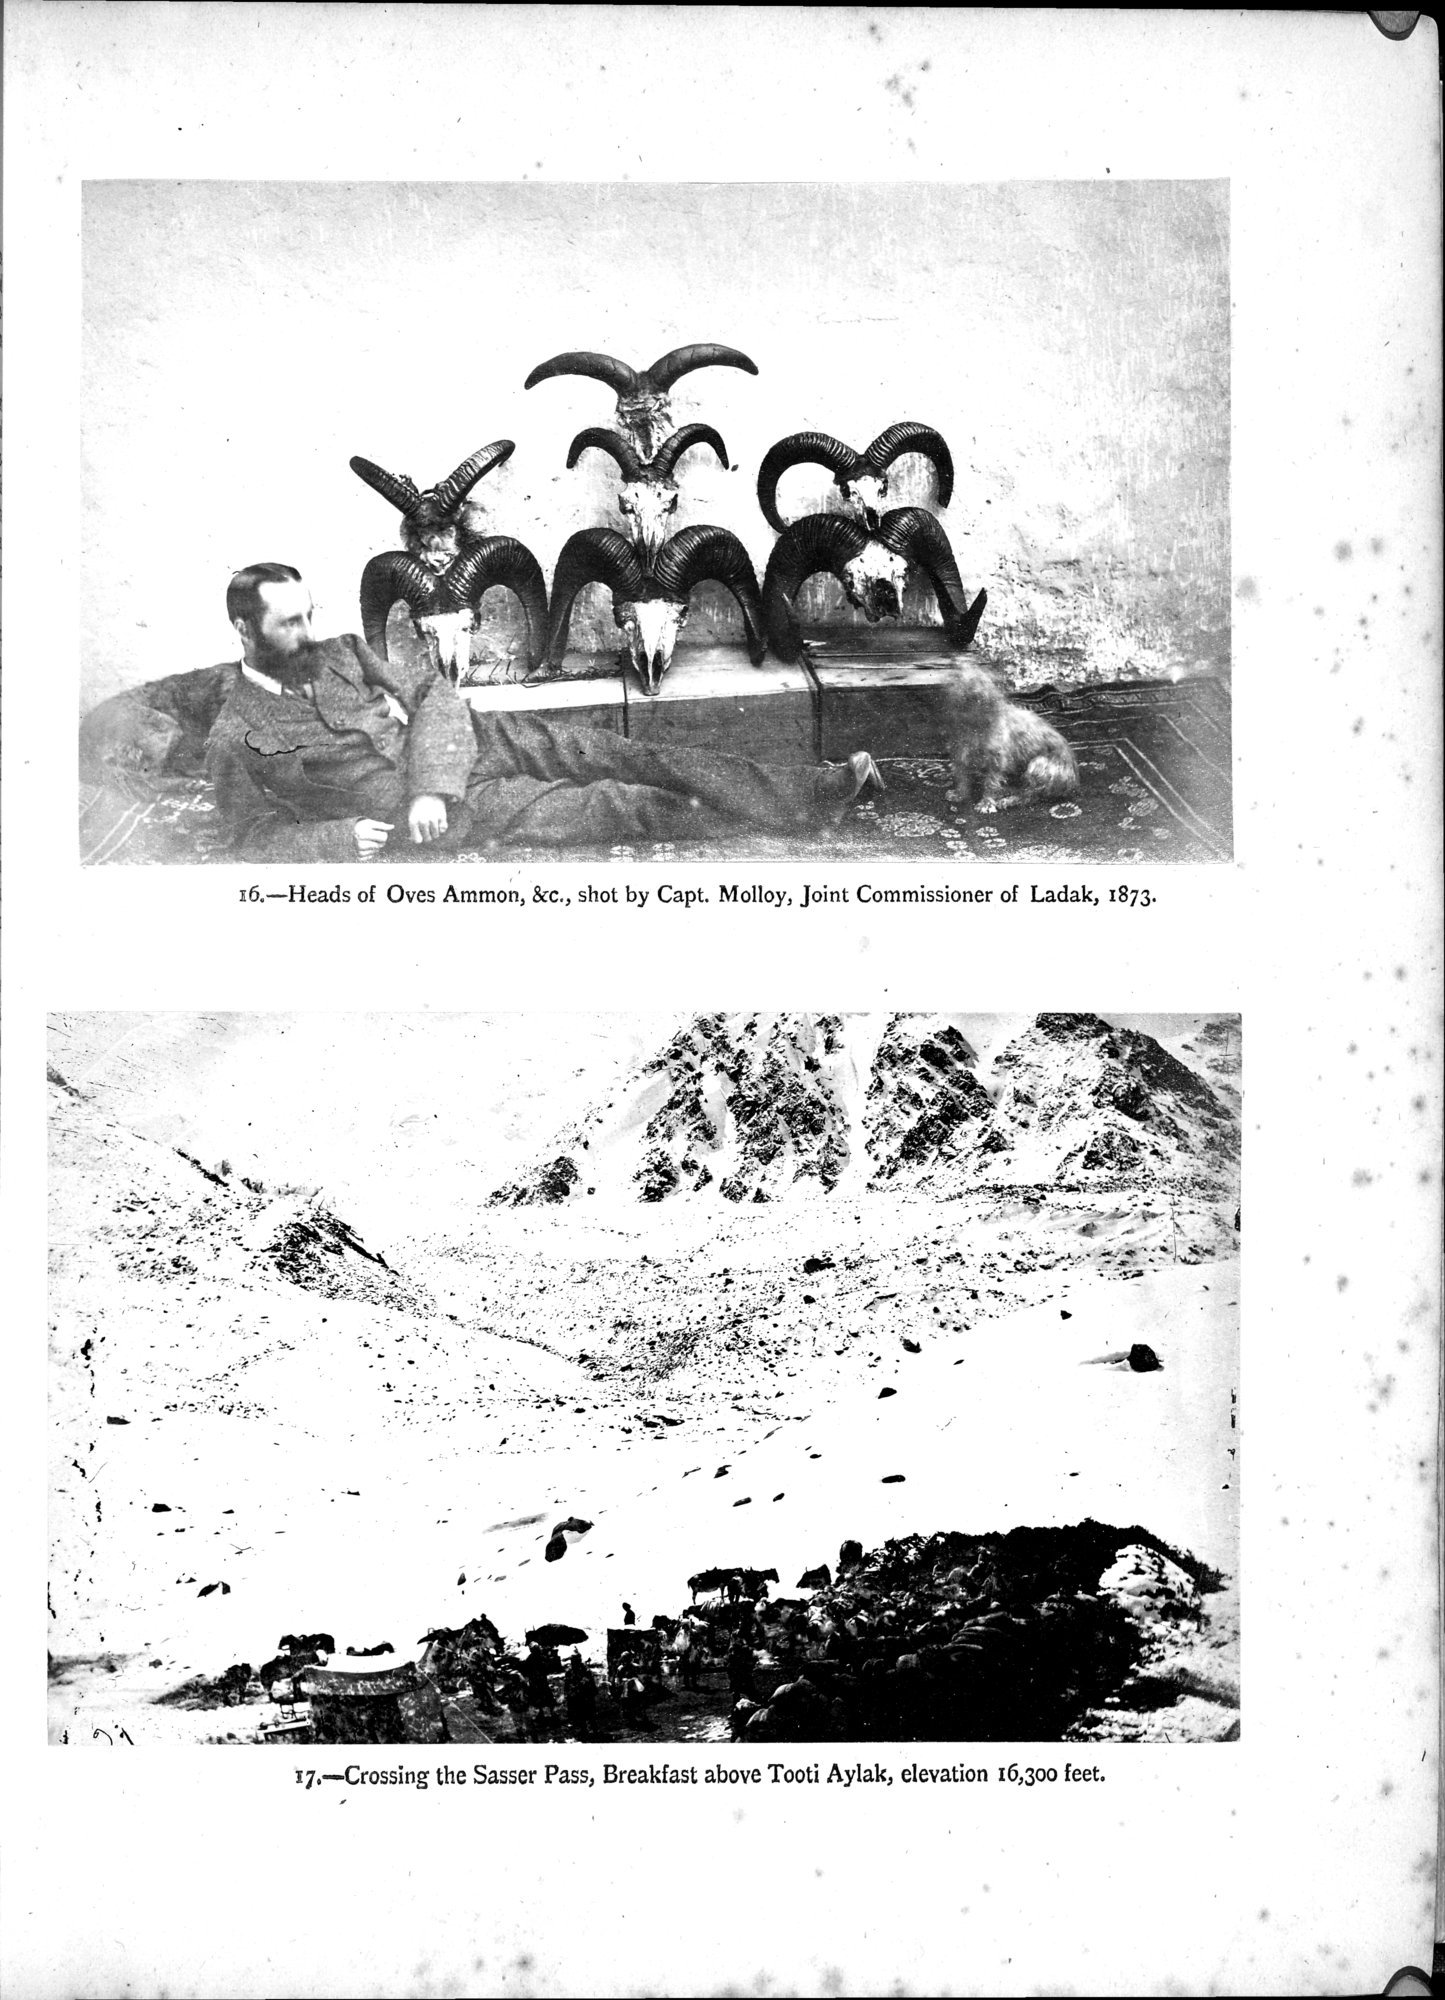 Report of a Mission to Yarkund in 1873 : vol.1 / Page 89 (Grayscale High Resolution Image)